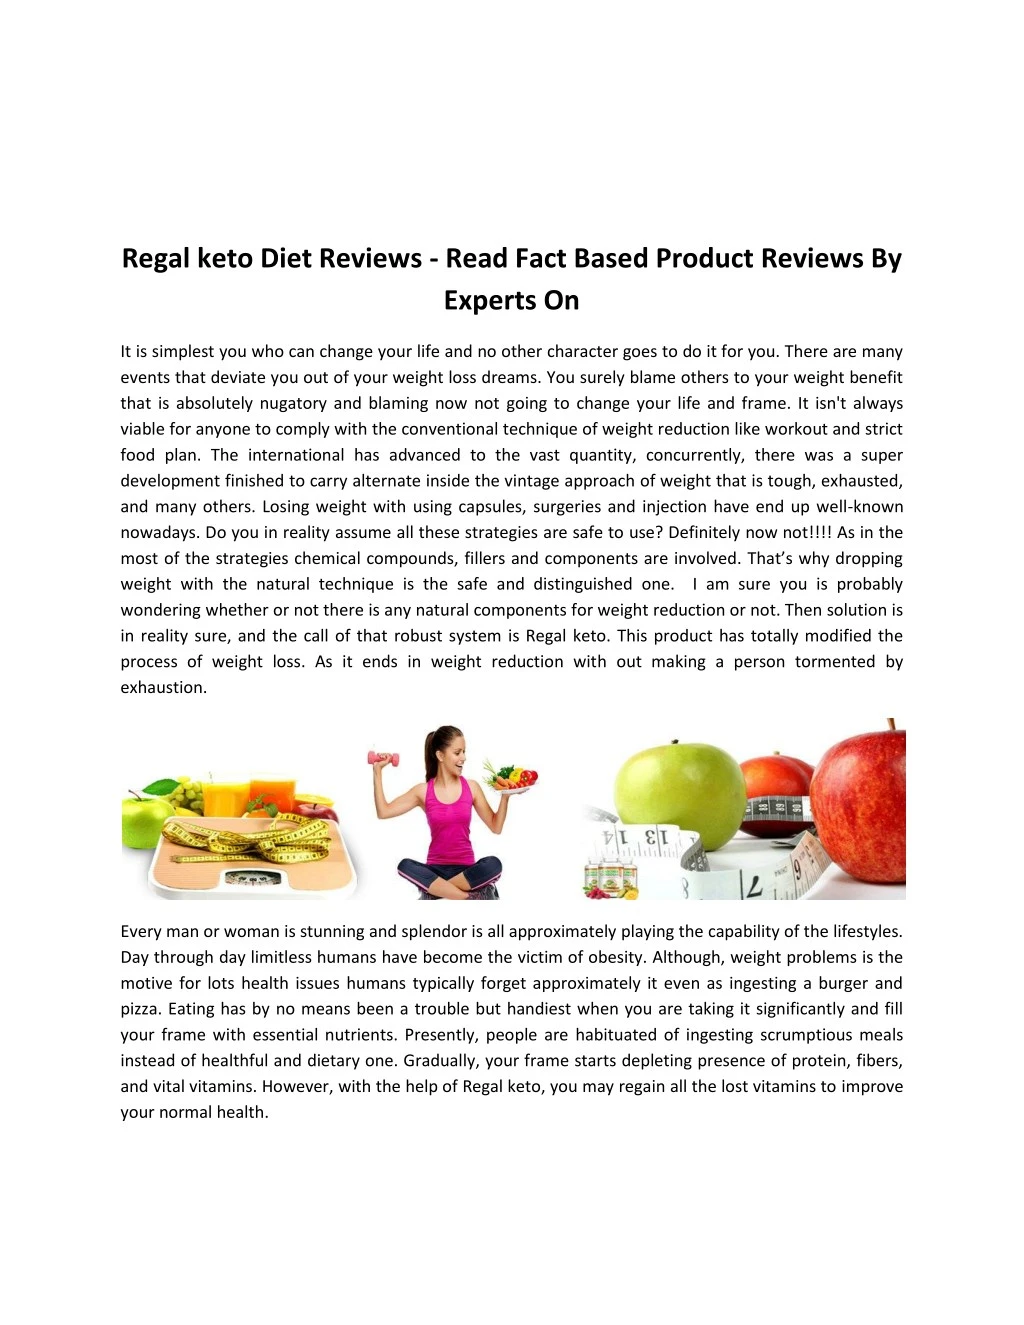 regal keto diet reviews read fact based product